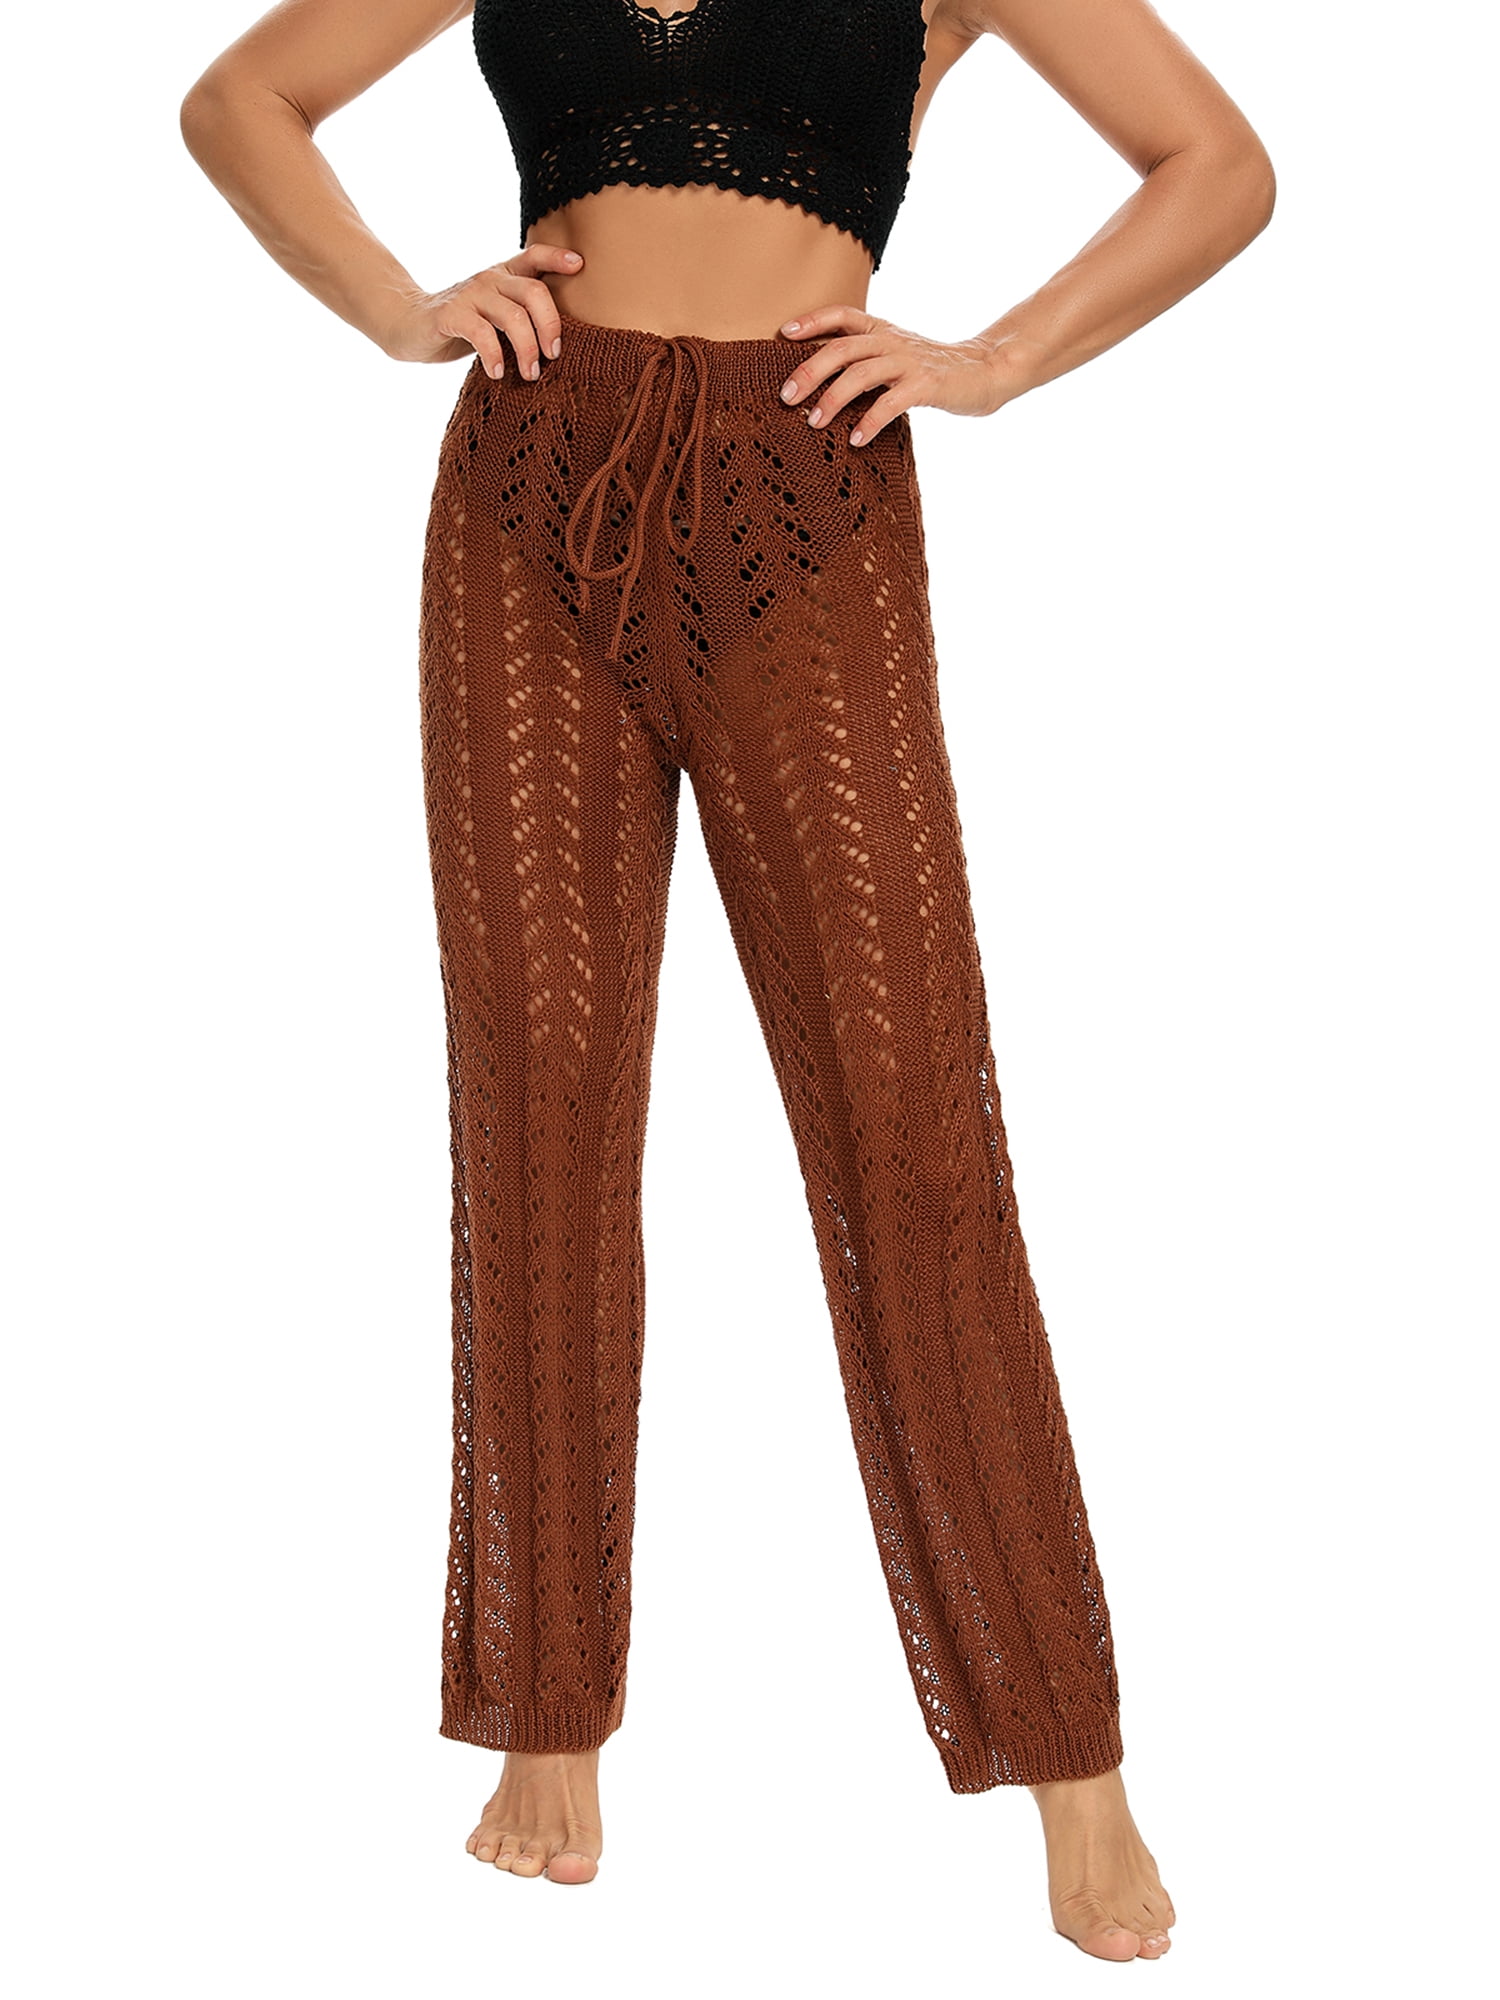 Womens Beach Cover Up Pants Drawstring Crochet Fishnet Hollow Out